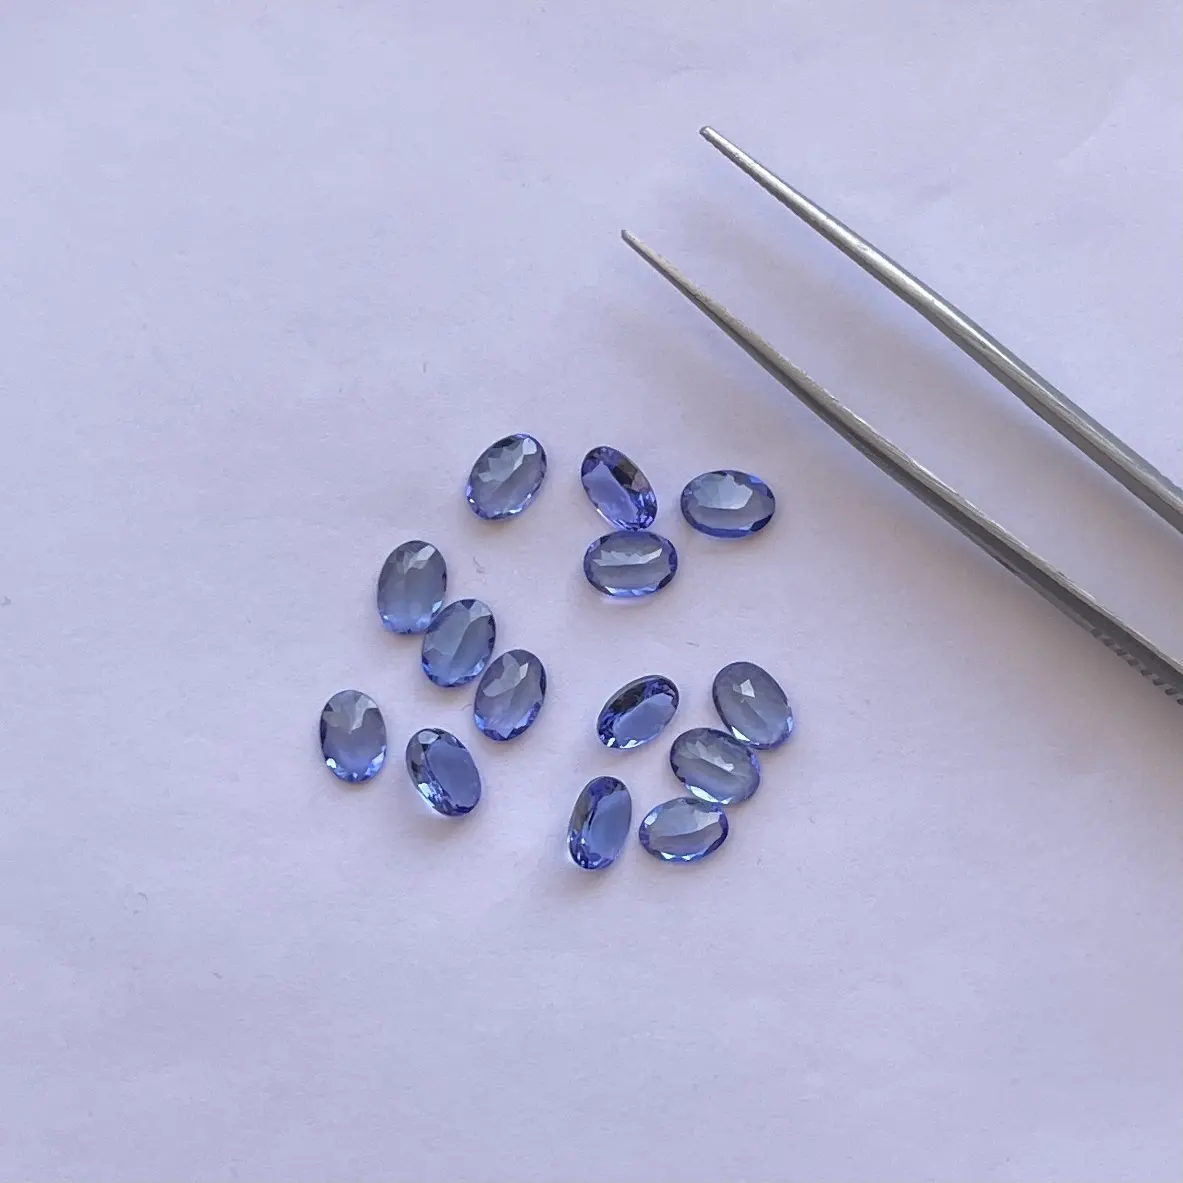 5x7mm Natural Tanzanite Faceted Oval Cut Loose Calibrated Wholesale Semi Precious Gemstones Supplier at Factory Price Online